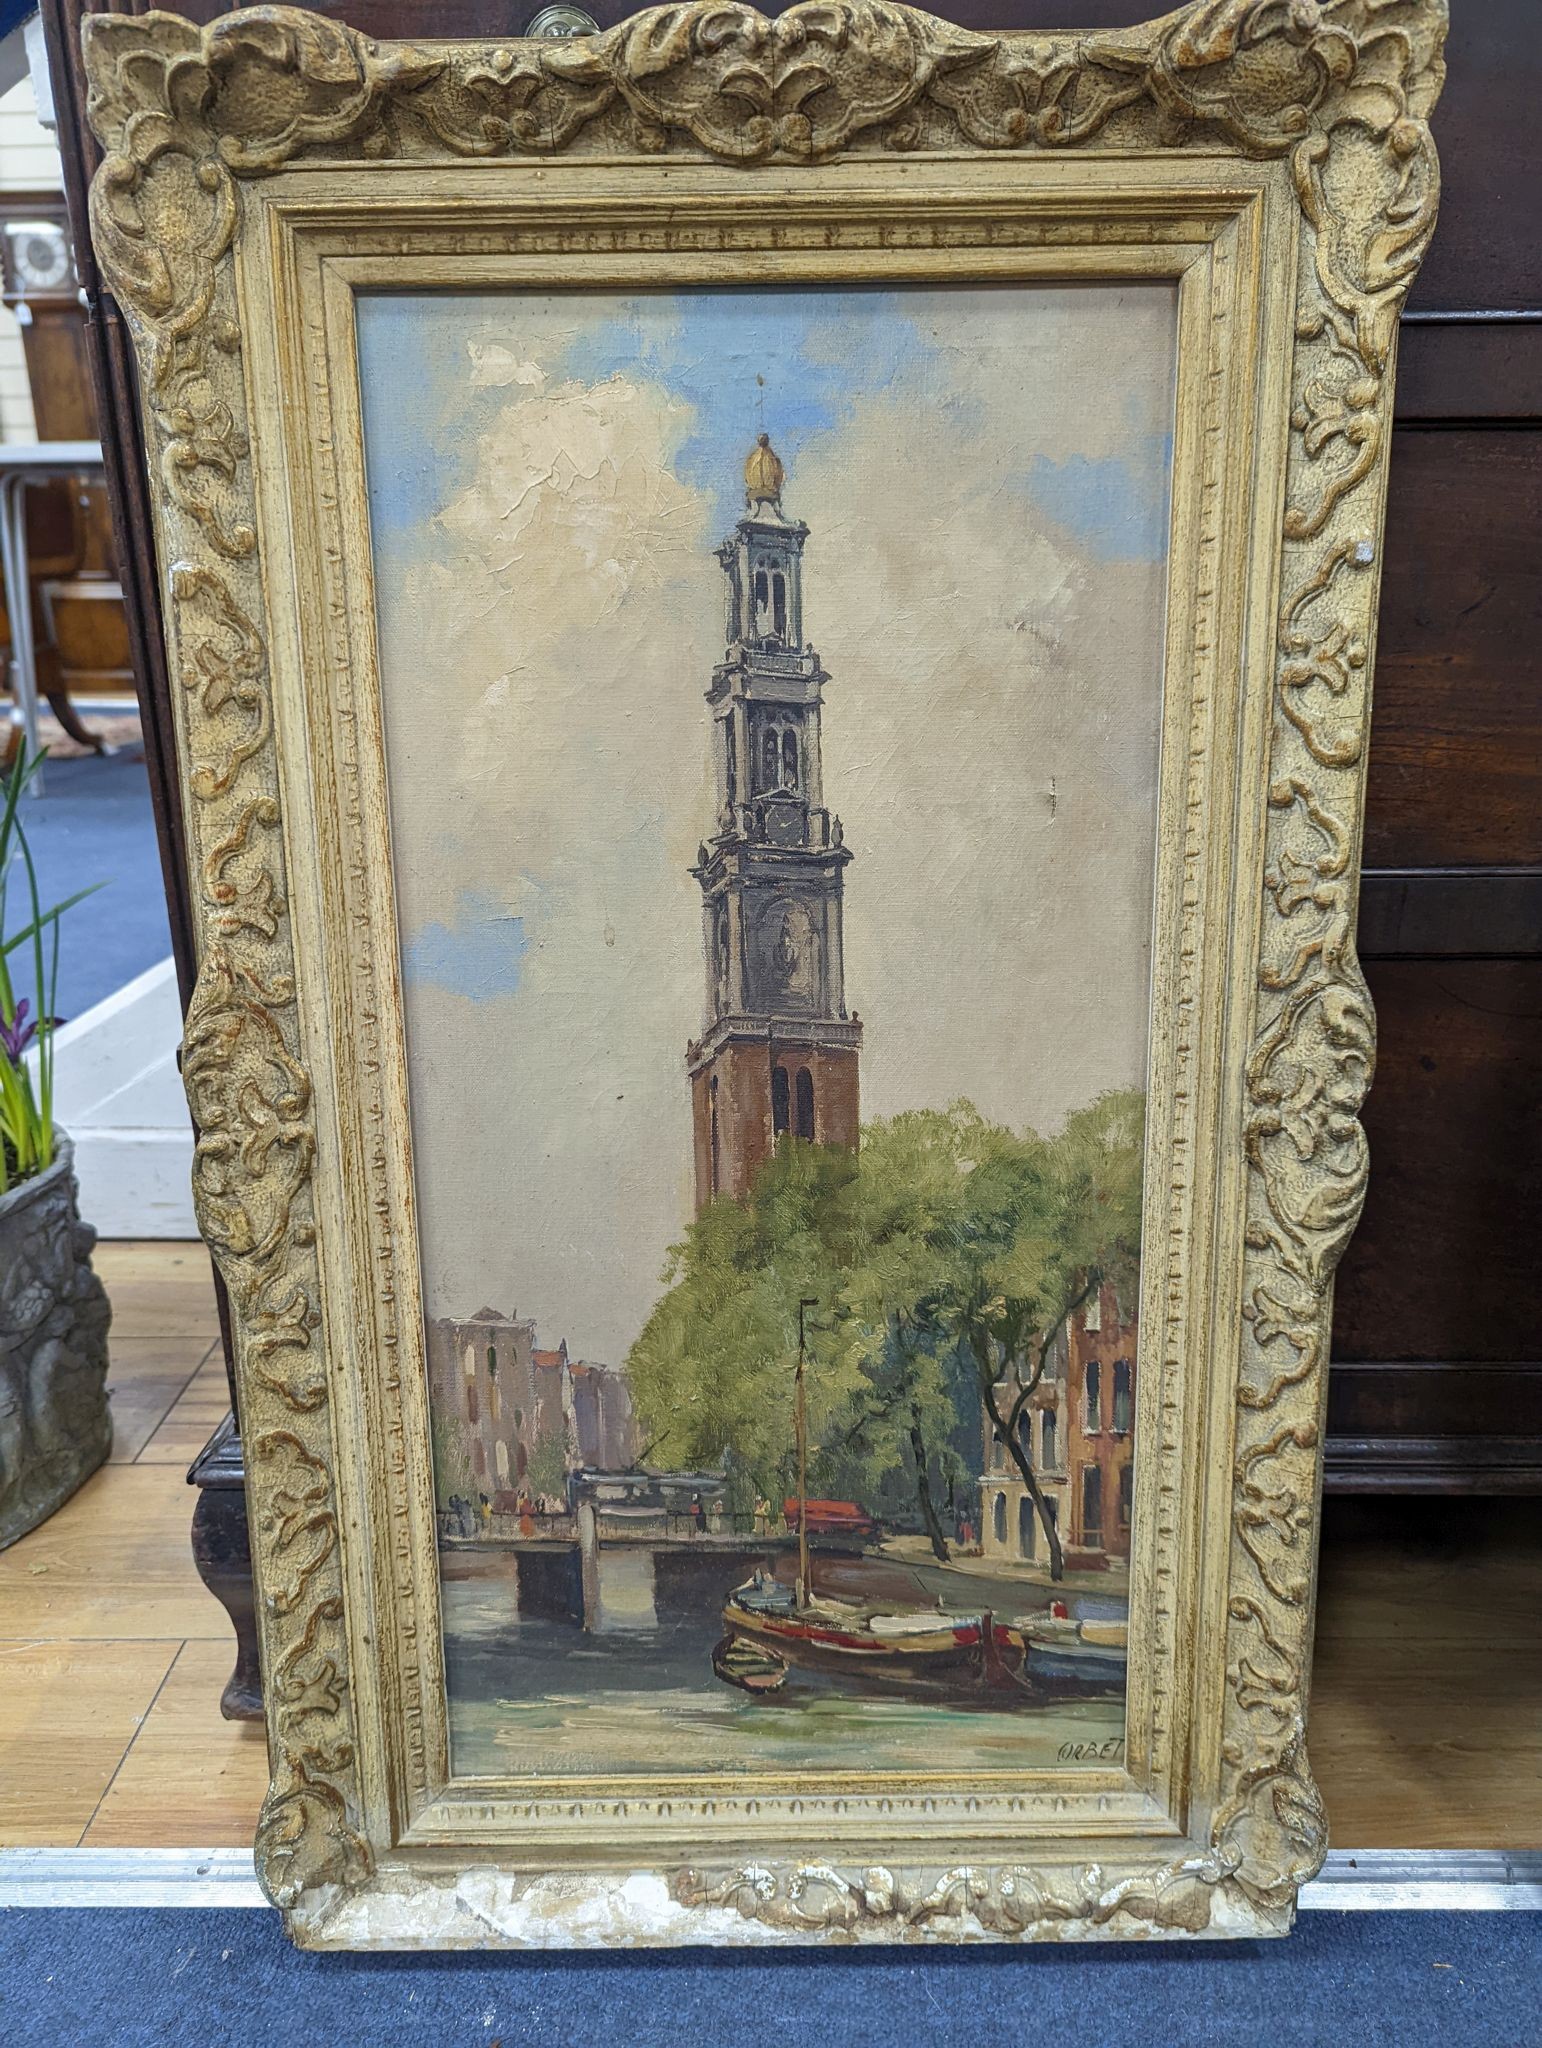 Corbet, oil on canvas, View of a Dutch church spire, signed, 59 x 29cm